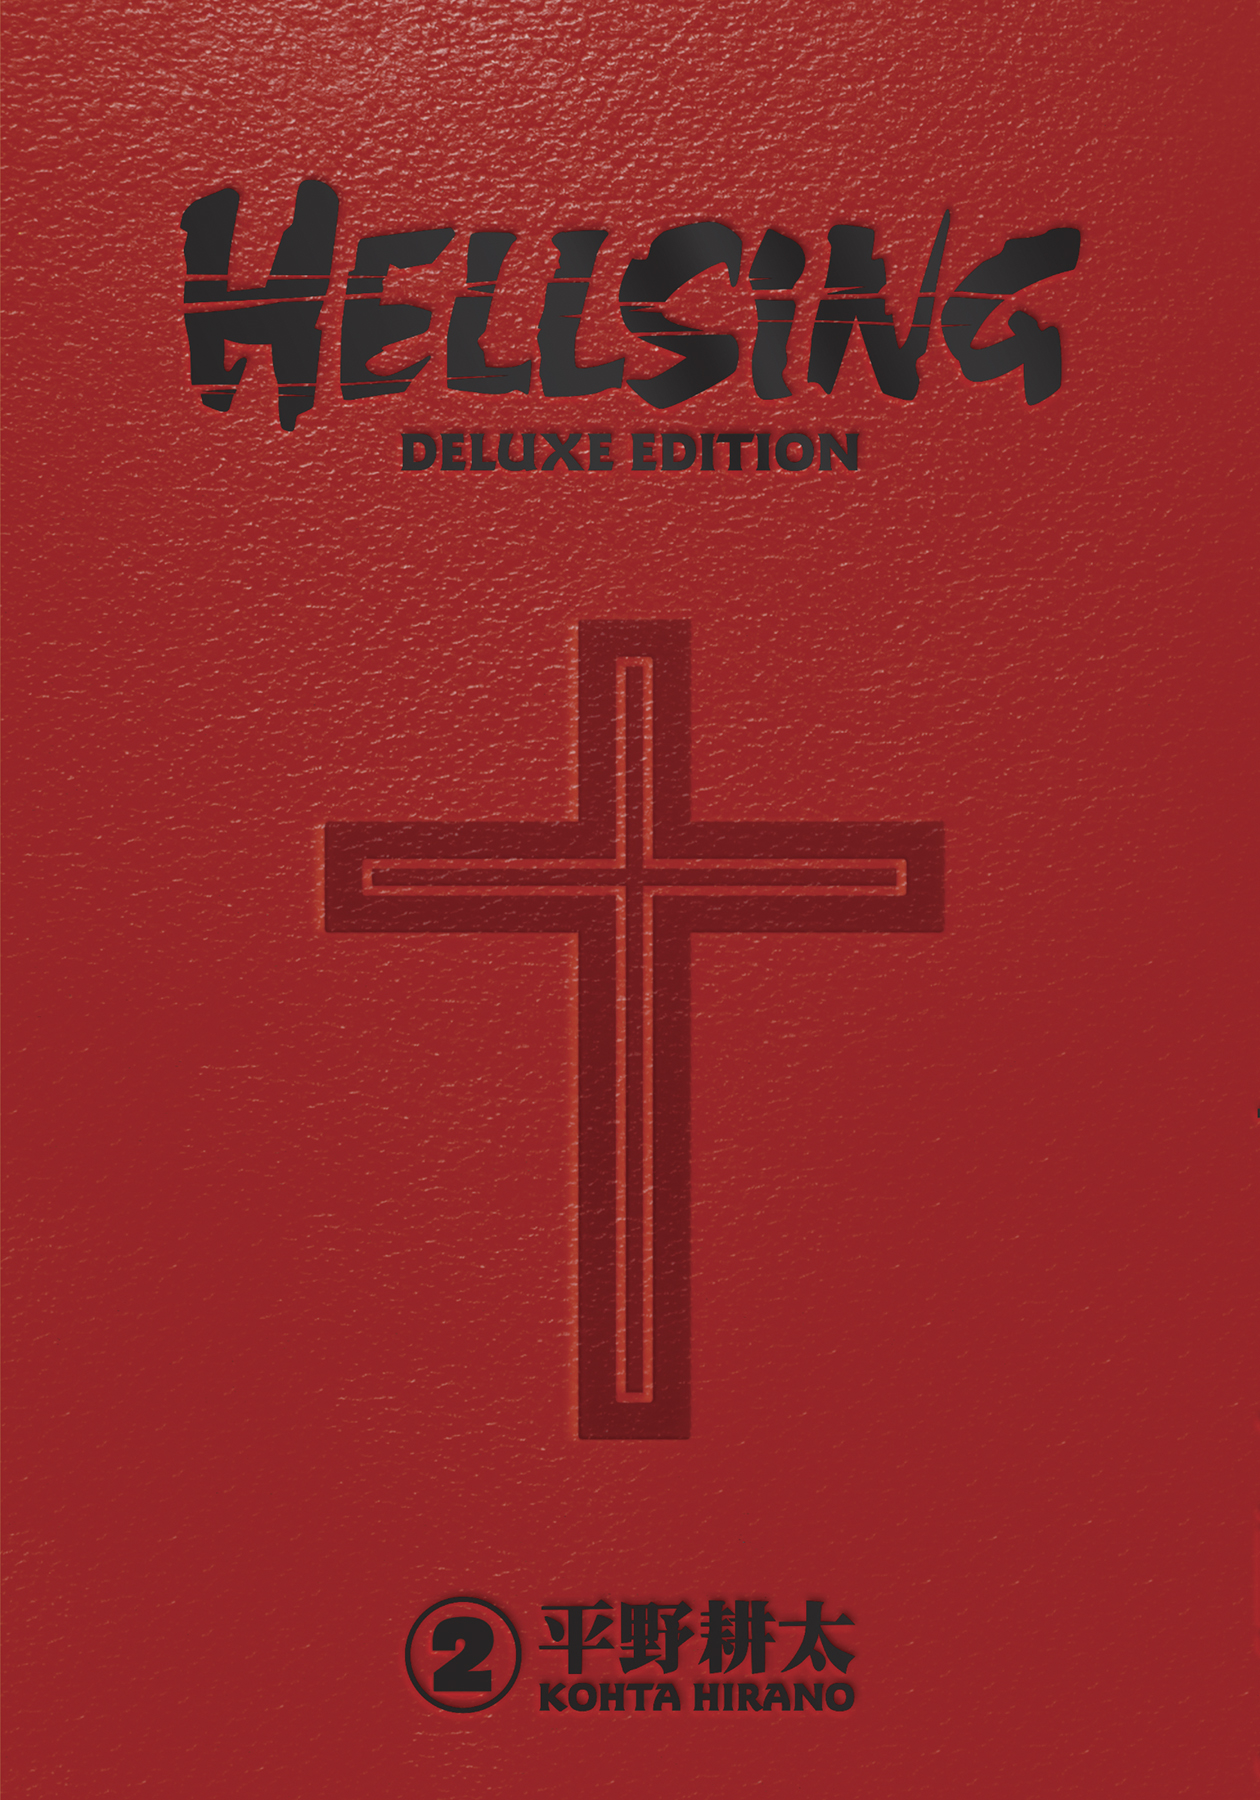 Hellsing Deluxe Edition Hardcover Volume 2 (Mature)